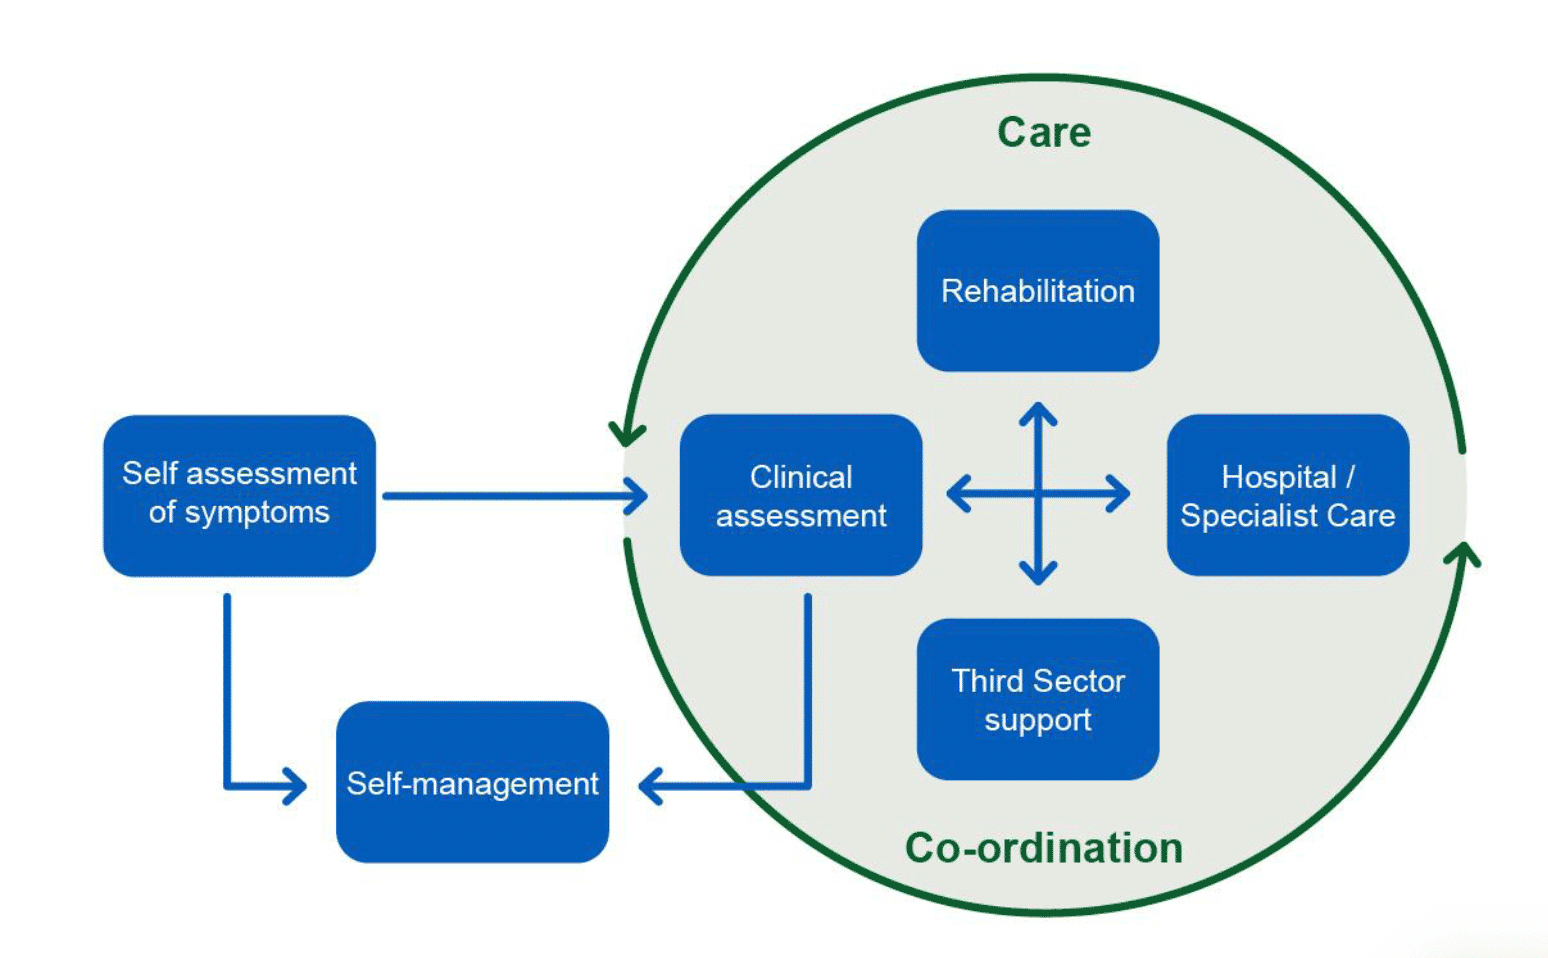 A diagram displaying the entry route into, and key elements of care associated with Scotland’s Long COVID Service. Starting point on the furthest left is a box titled ‘self assessment of symptoms’, with arrows from this point leading to the right to boxes titled either ‘self-management’ or ‘clinical assessment’. ‘Clinical assessment’ is connected by further arrows to the right to three boxes titled ‘Third Sector Support’, ‘Hospital/Specialist Care’ and ‘Rehabilitation’ respectively. These four elements are captured within a circle which contains the title ‘care co-ordination’.